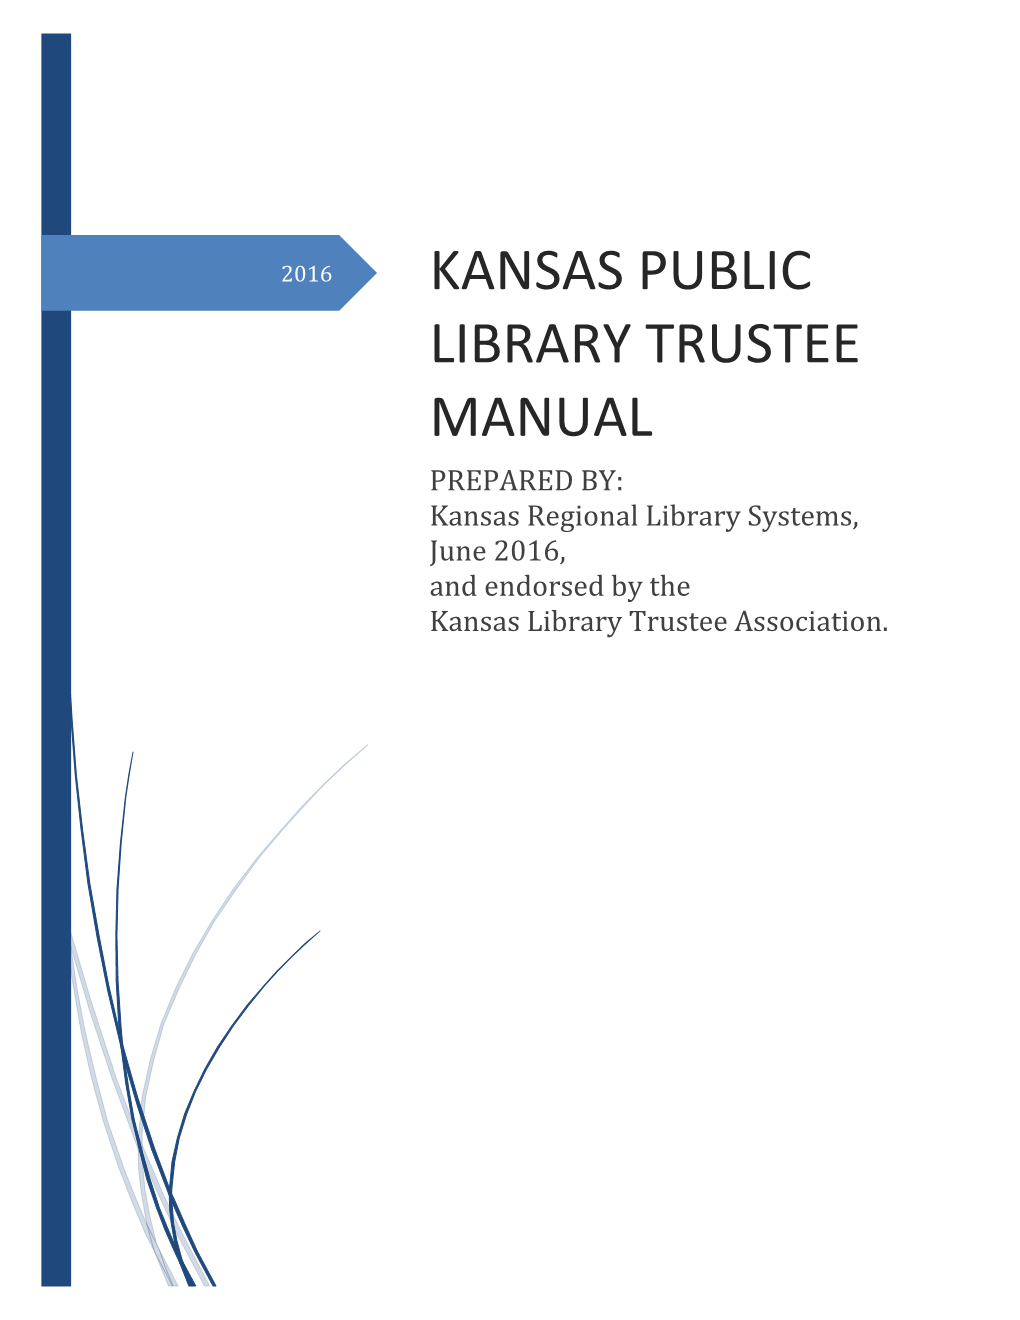 TRUSTEE MANUAL PREPARED BY: Kansas Regional Library Systems, June 2016, and Endorsed by the Kansas Library Trustee Association